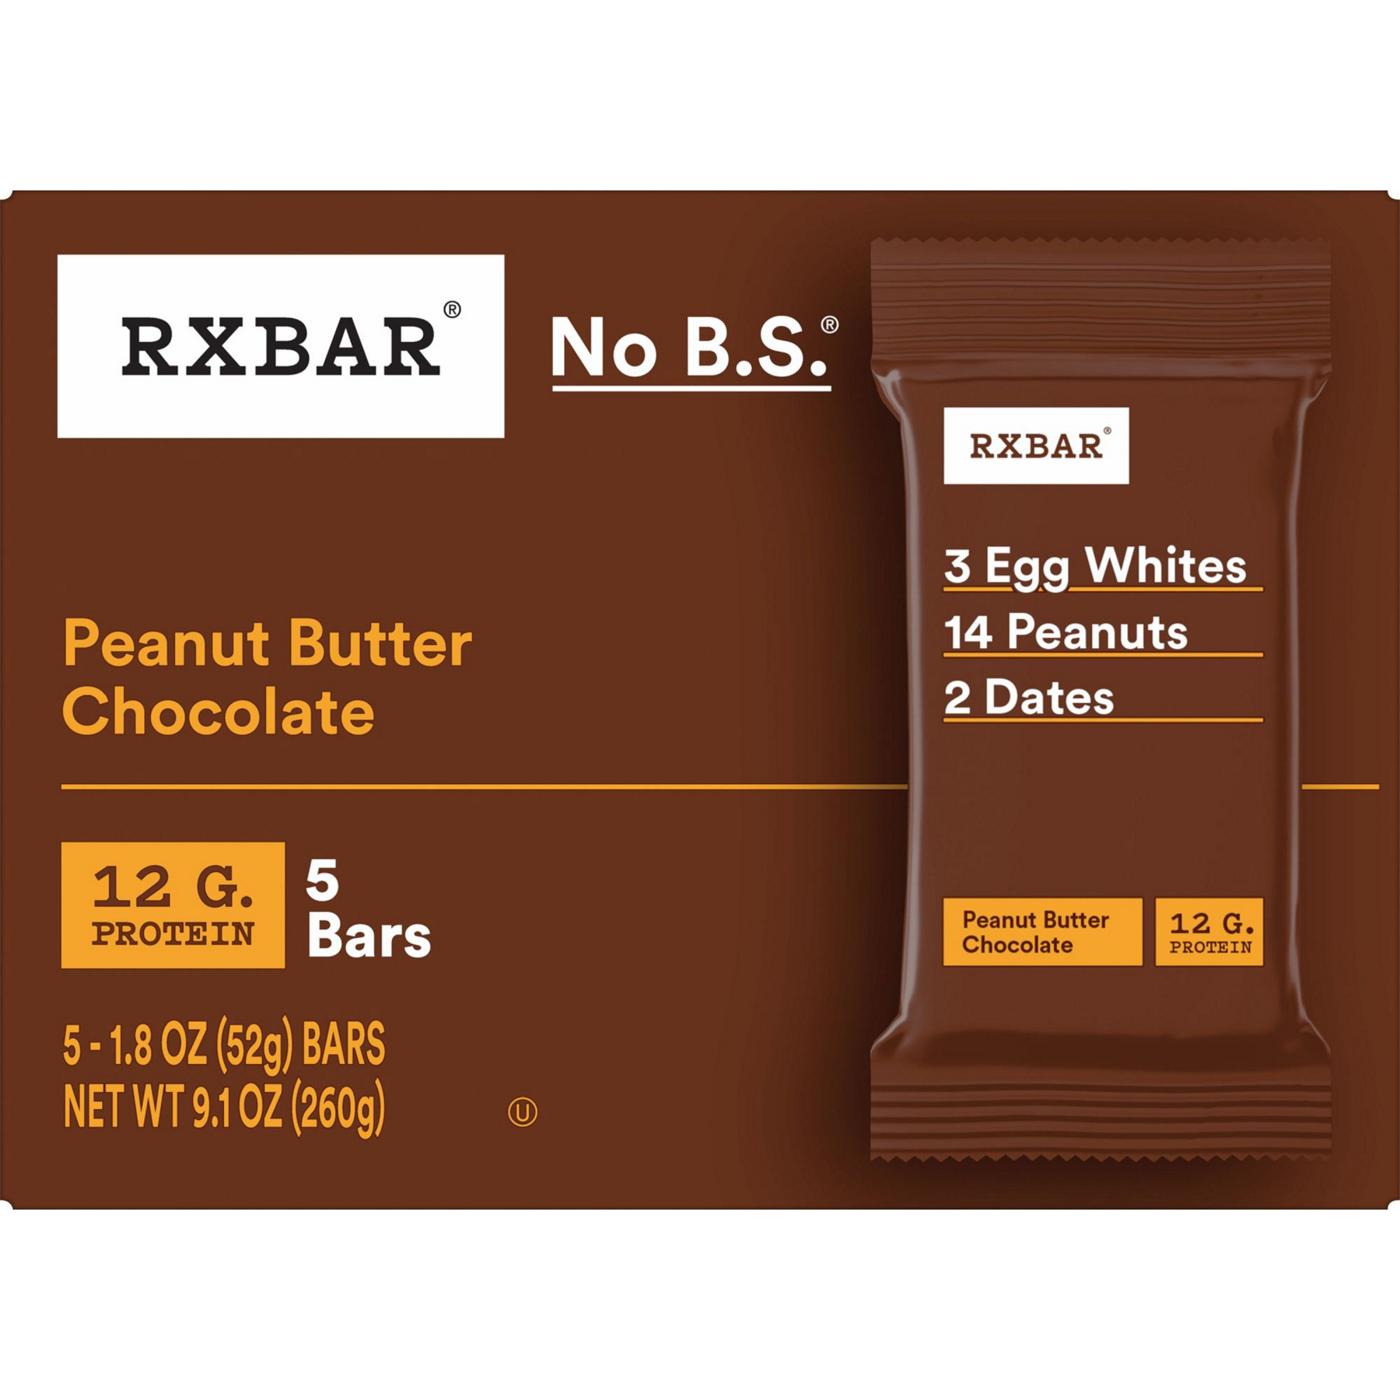 RXBAR Peanut Butter Chocolate Protein Bars; image 2 of 3